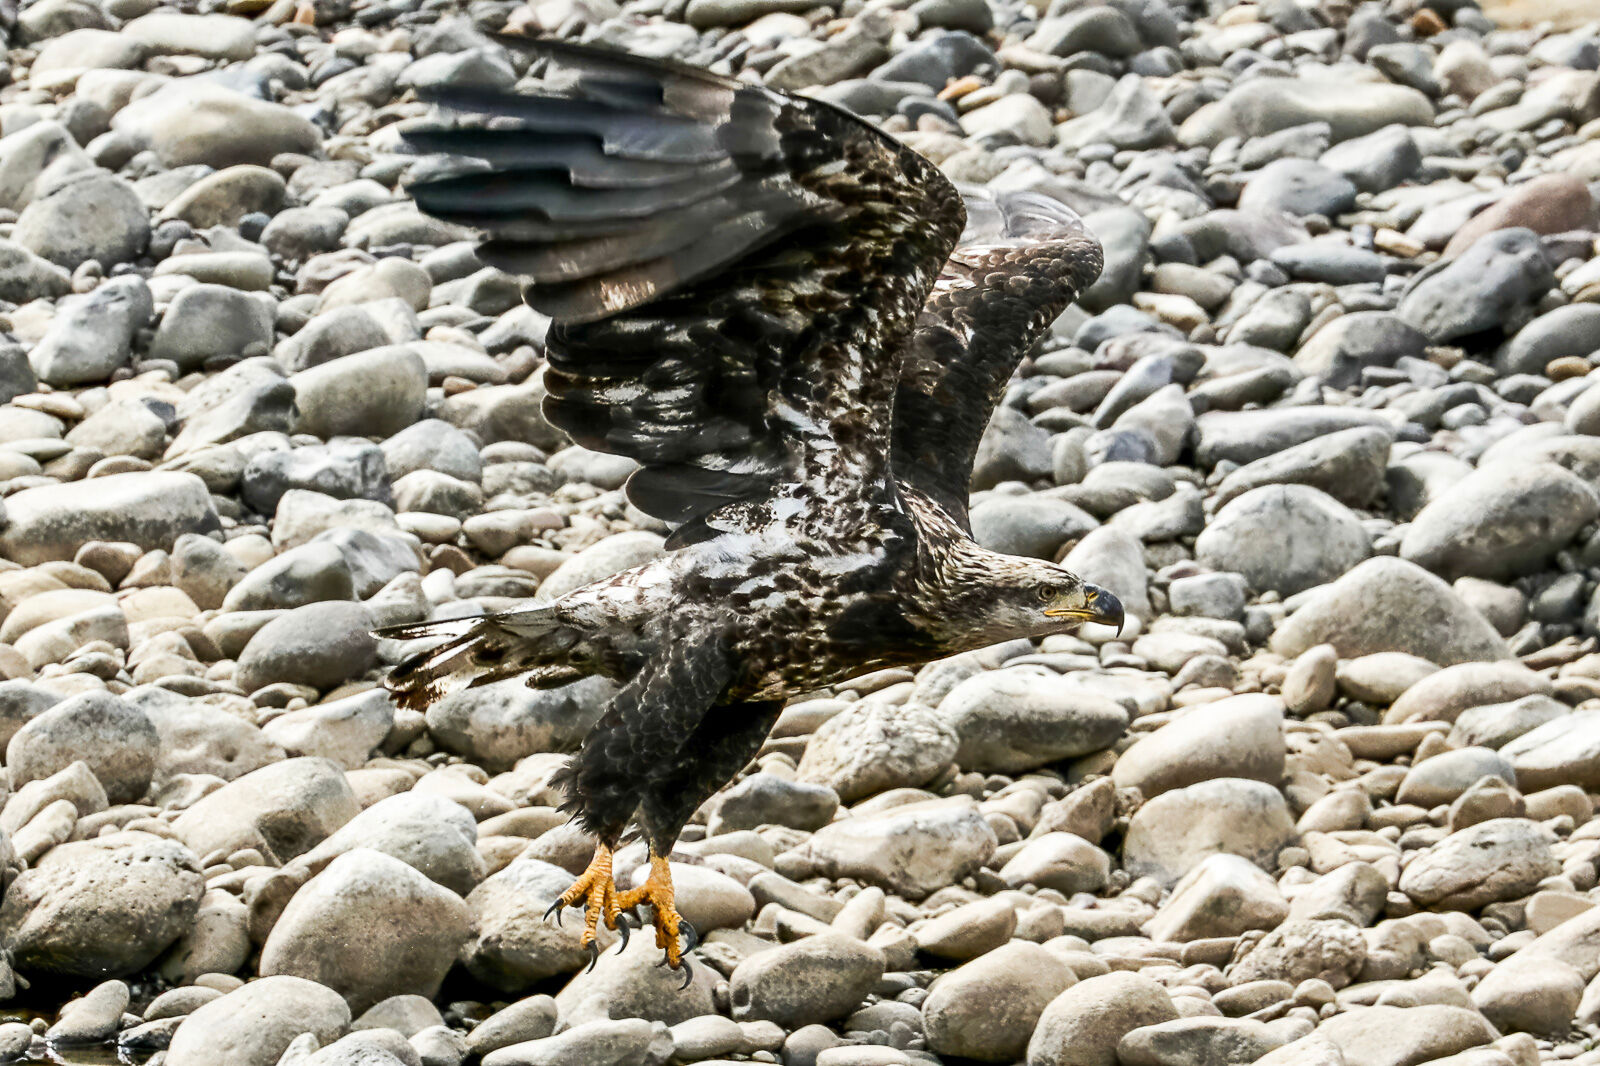 Juvenile Bald Eagle takes off on a beach on Soda Butte Creek in the Lamar Valley, Yellowstone National Park